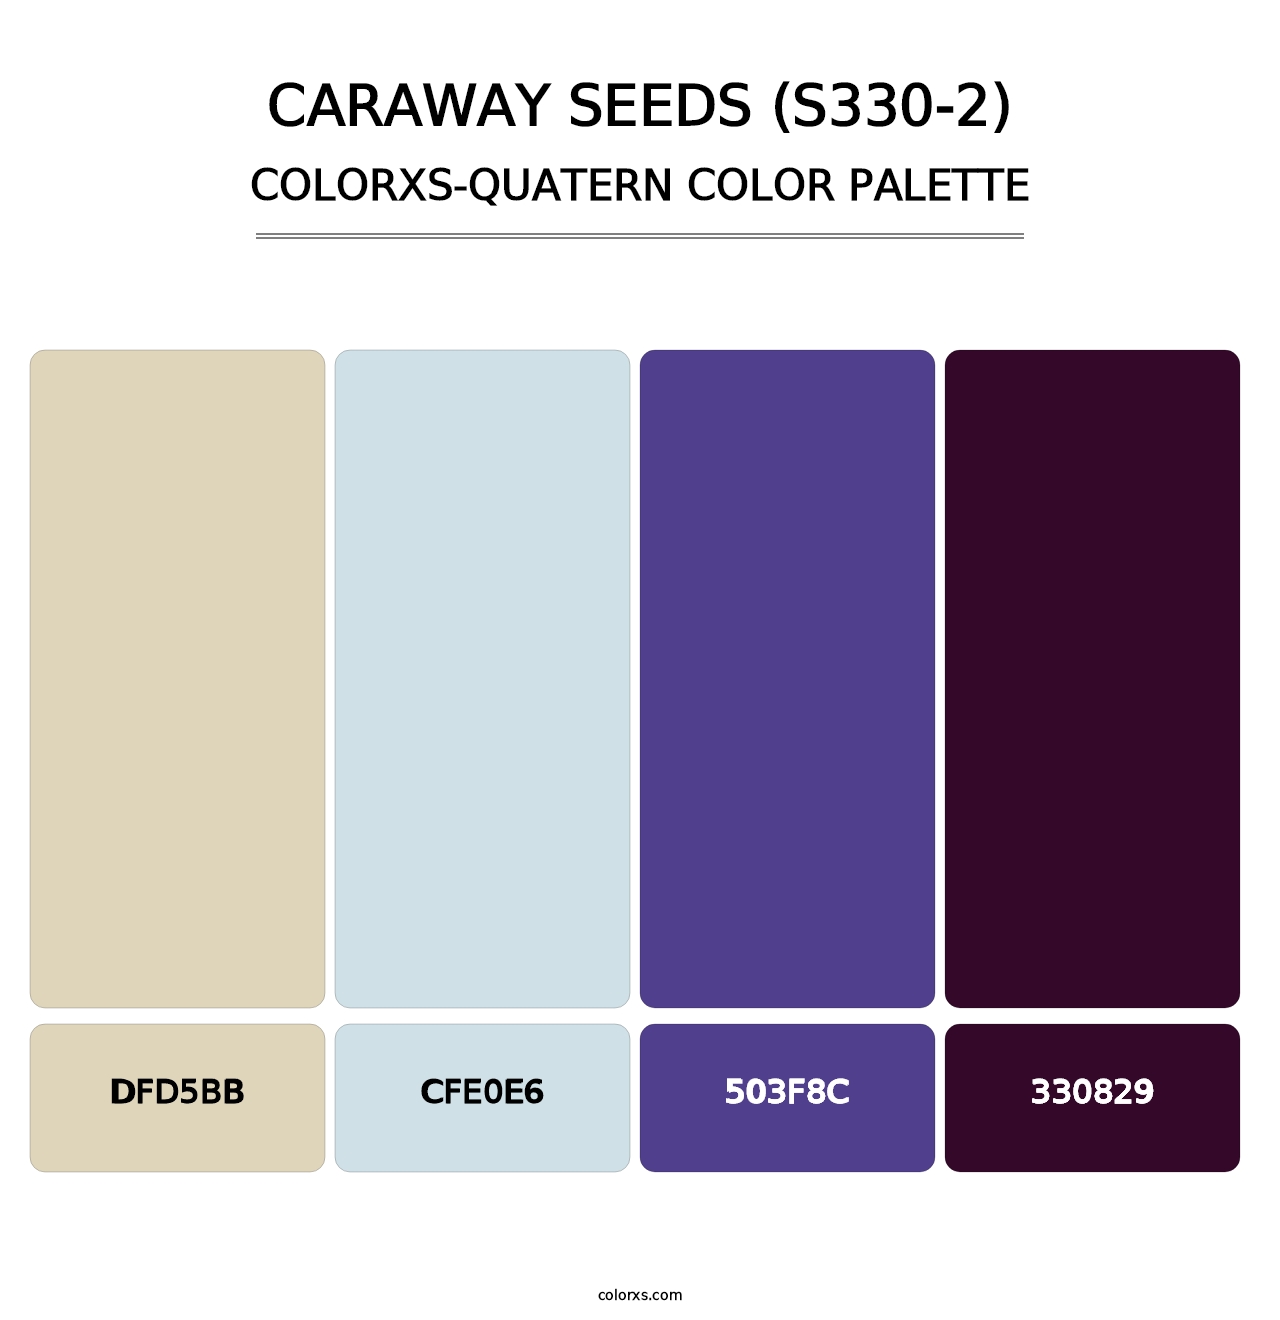 Caraway Seeds (S330-2) - Colorxs Quatern Palette